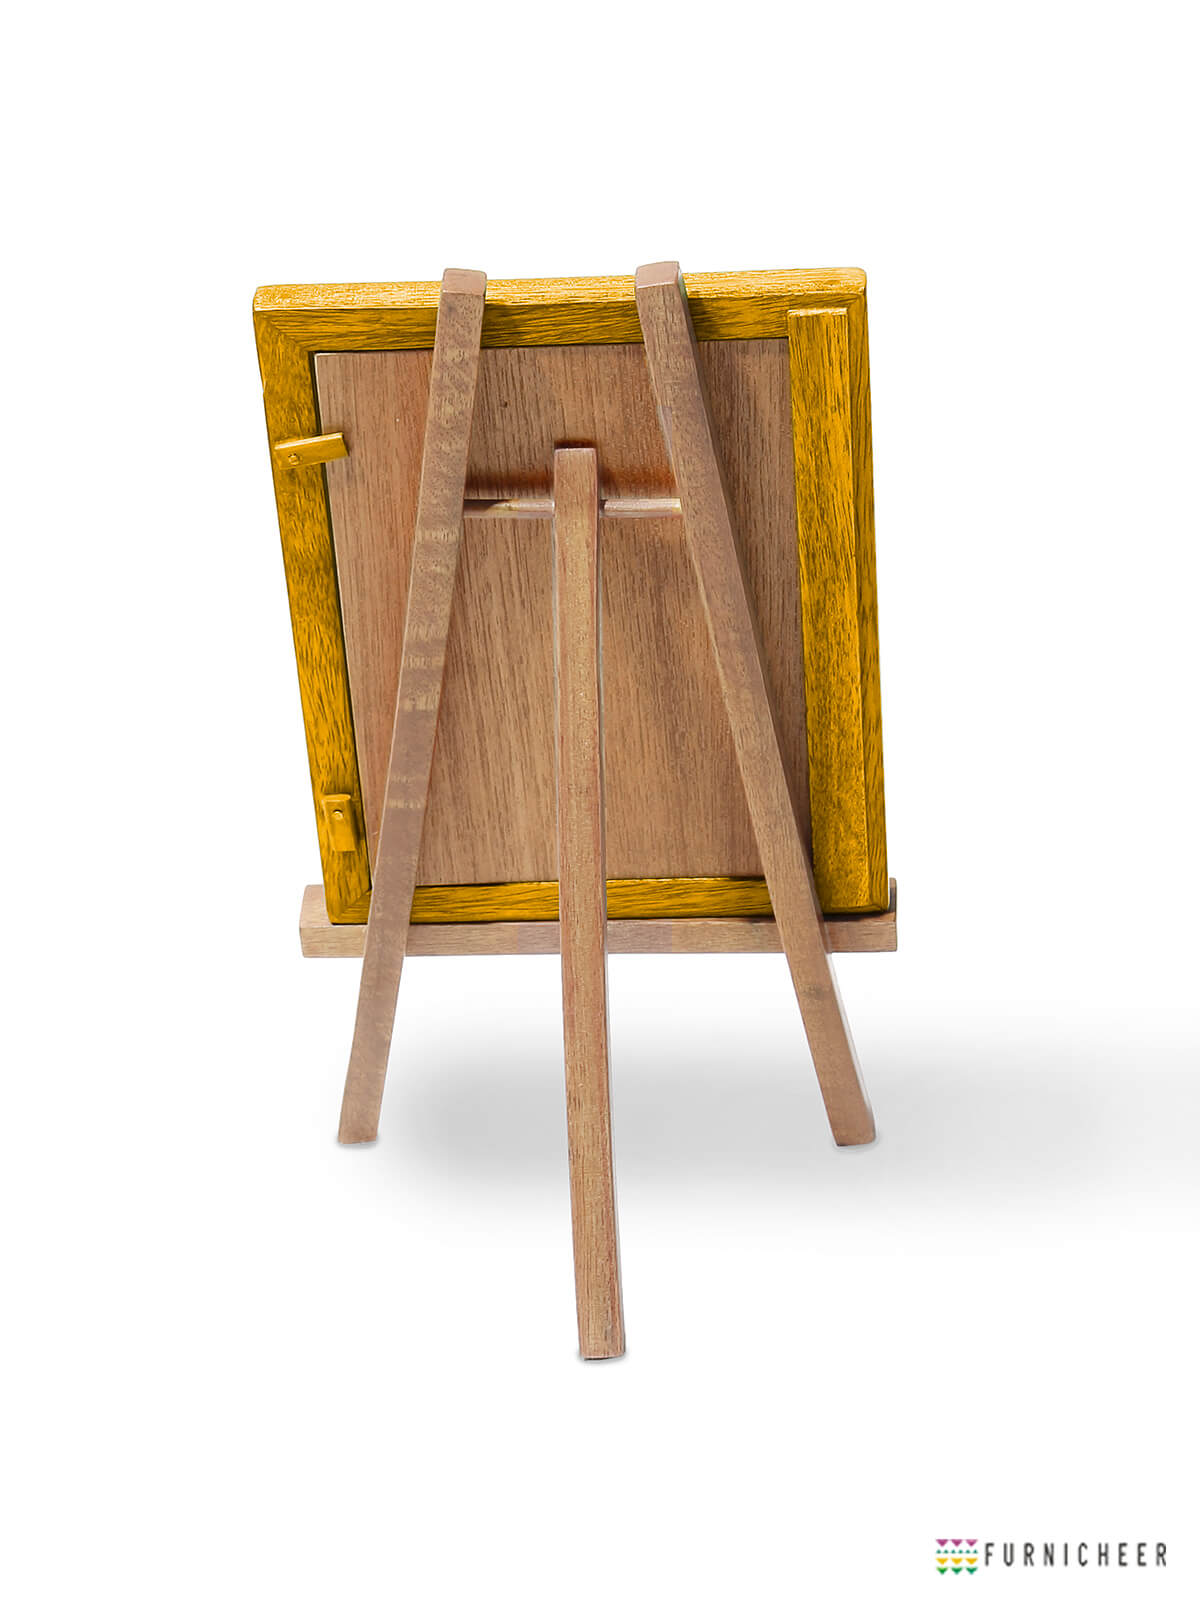 easel stand_10d